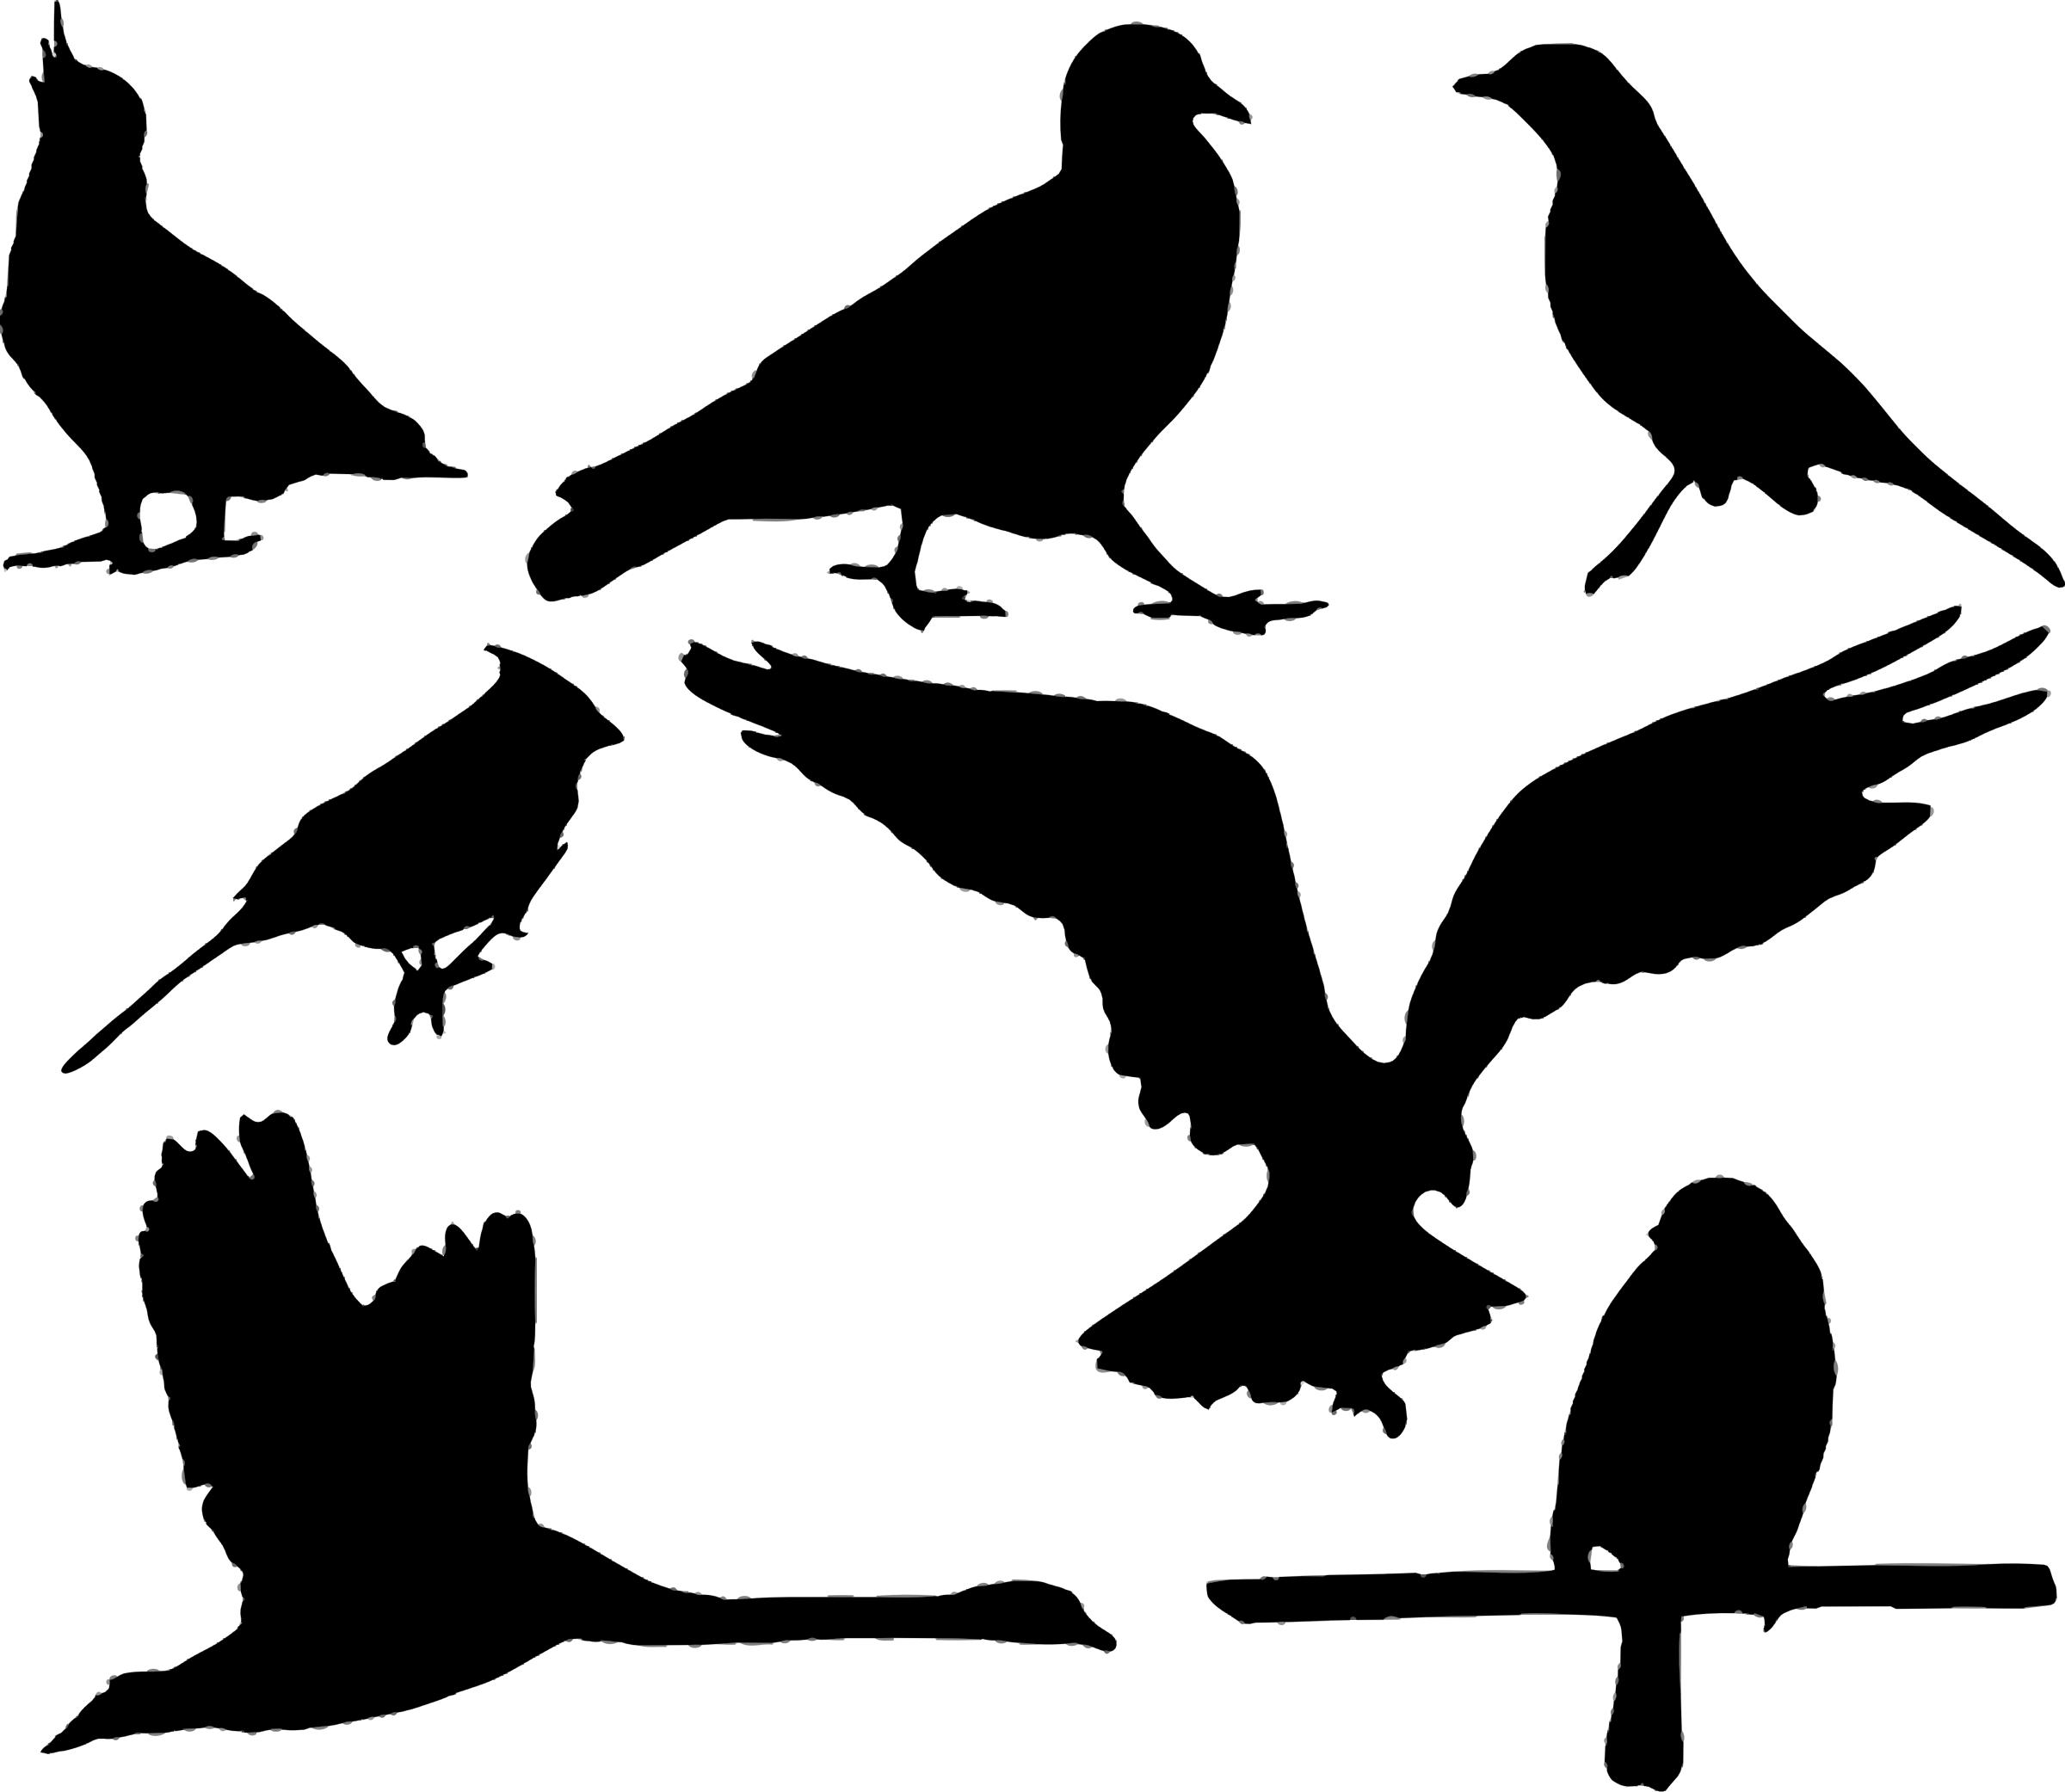 Bird silhouettes PNG icons